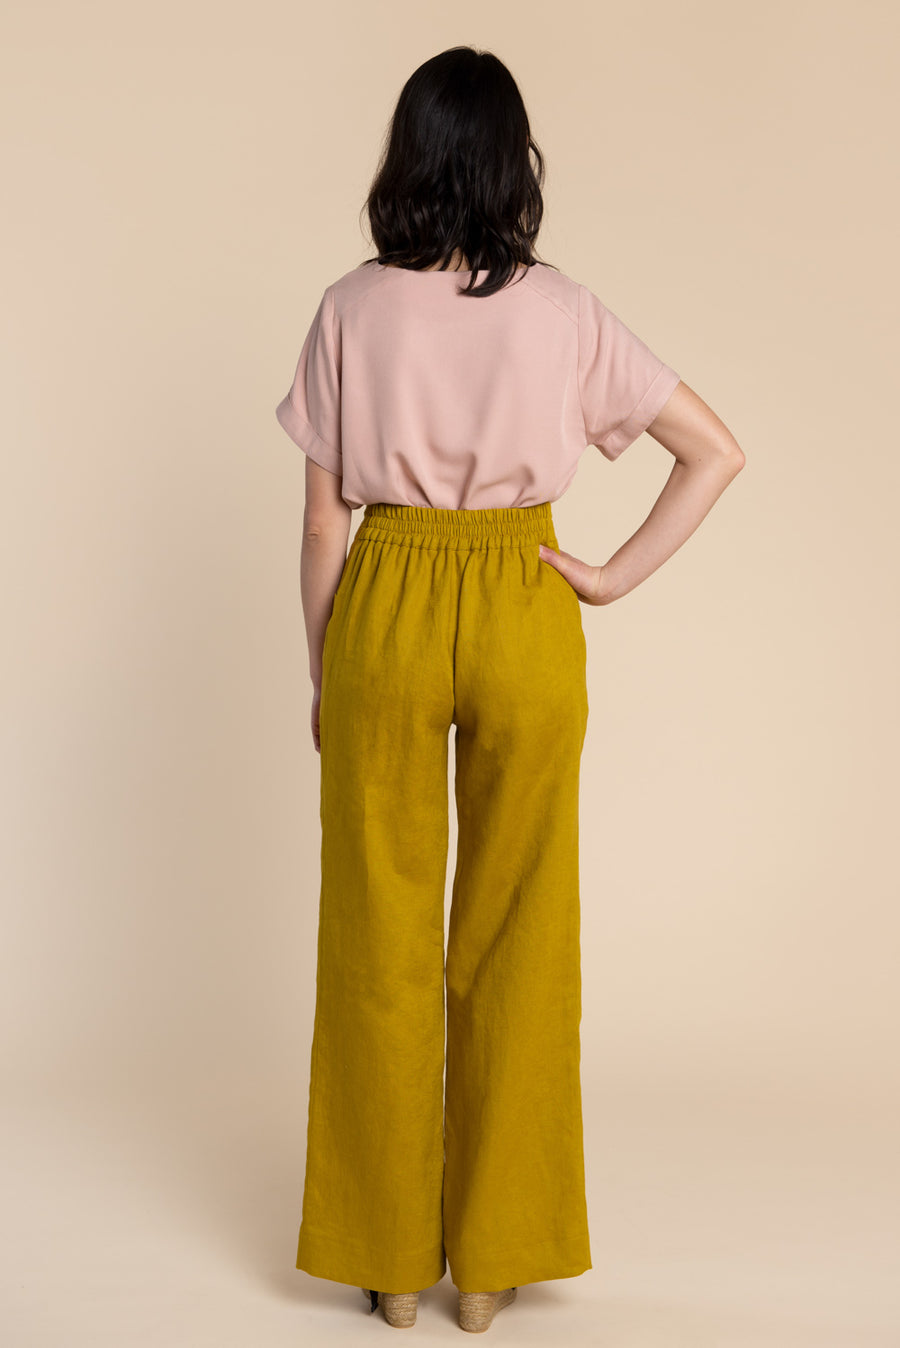 Culottes and Palazzo trousers pattern tutorial - QUICK SERIES